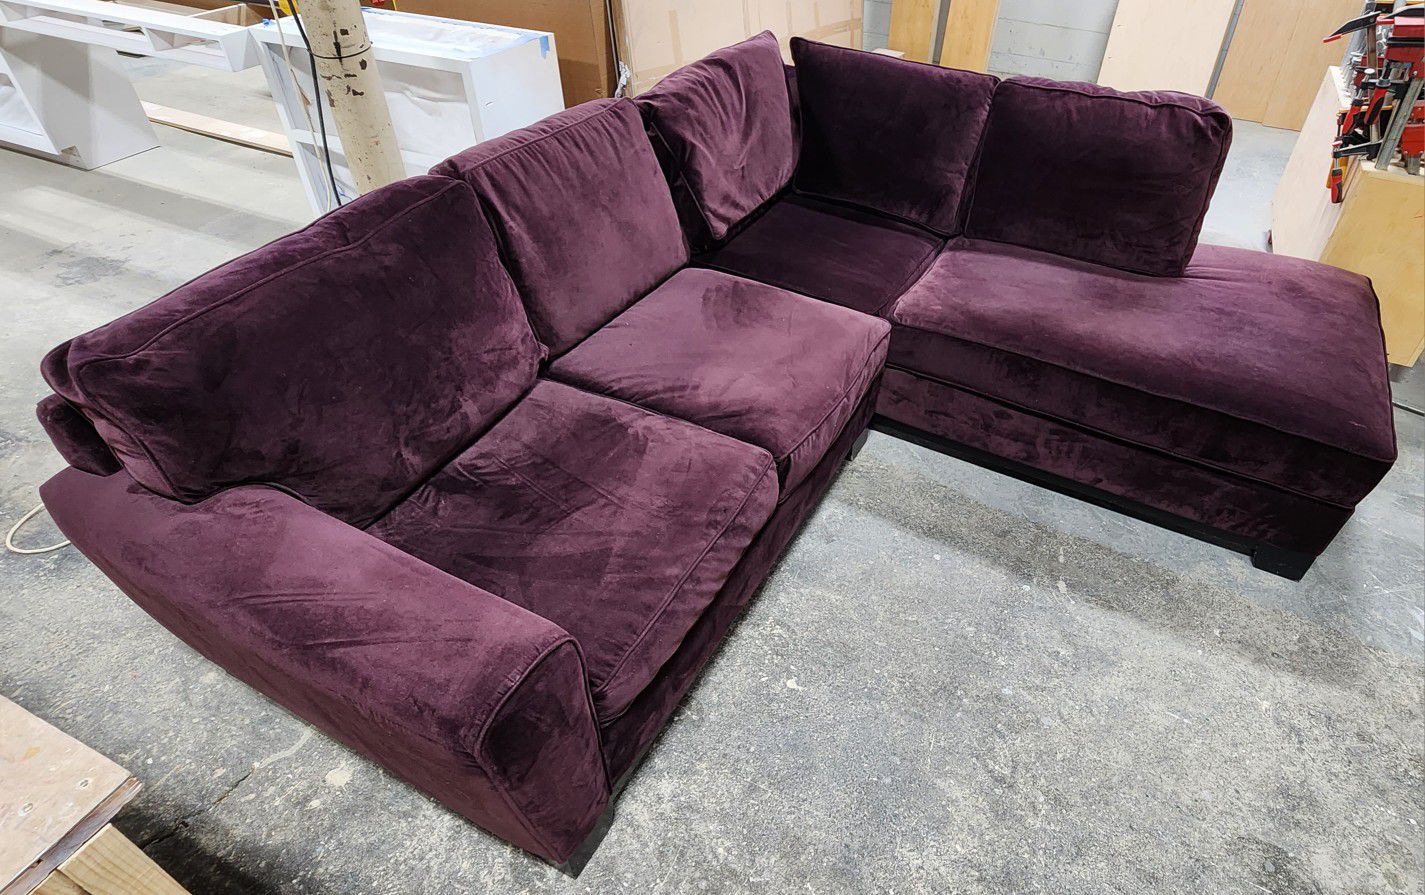 Macys Couch. Excellent Condition. Purple Velvet. Delivery Is Available!